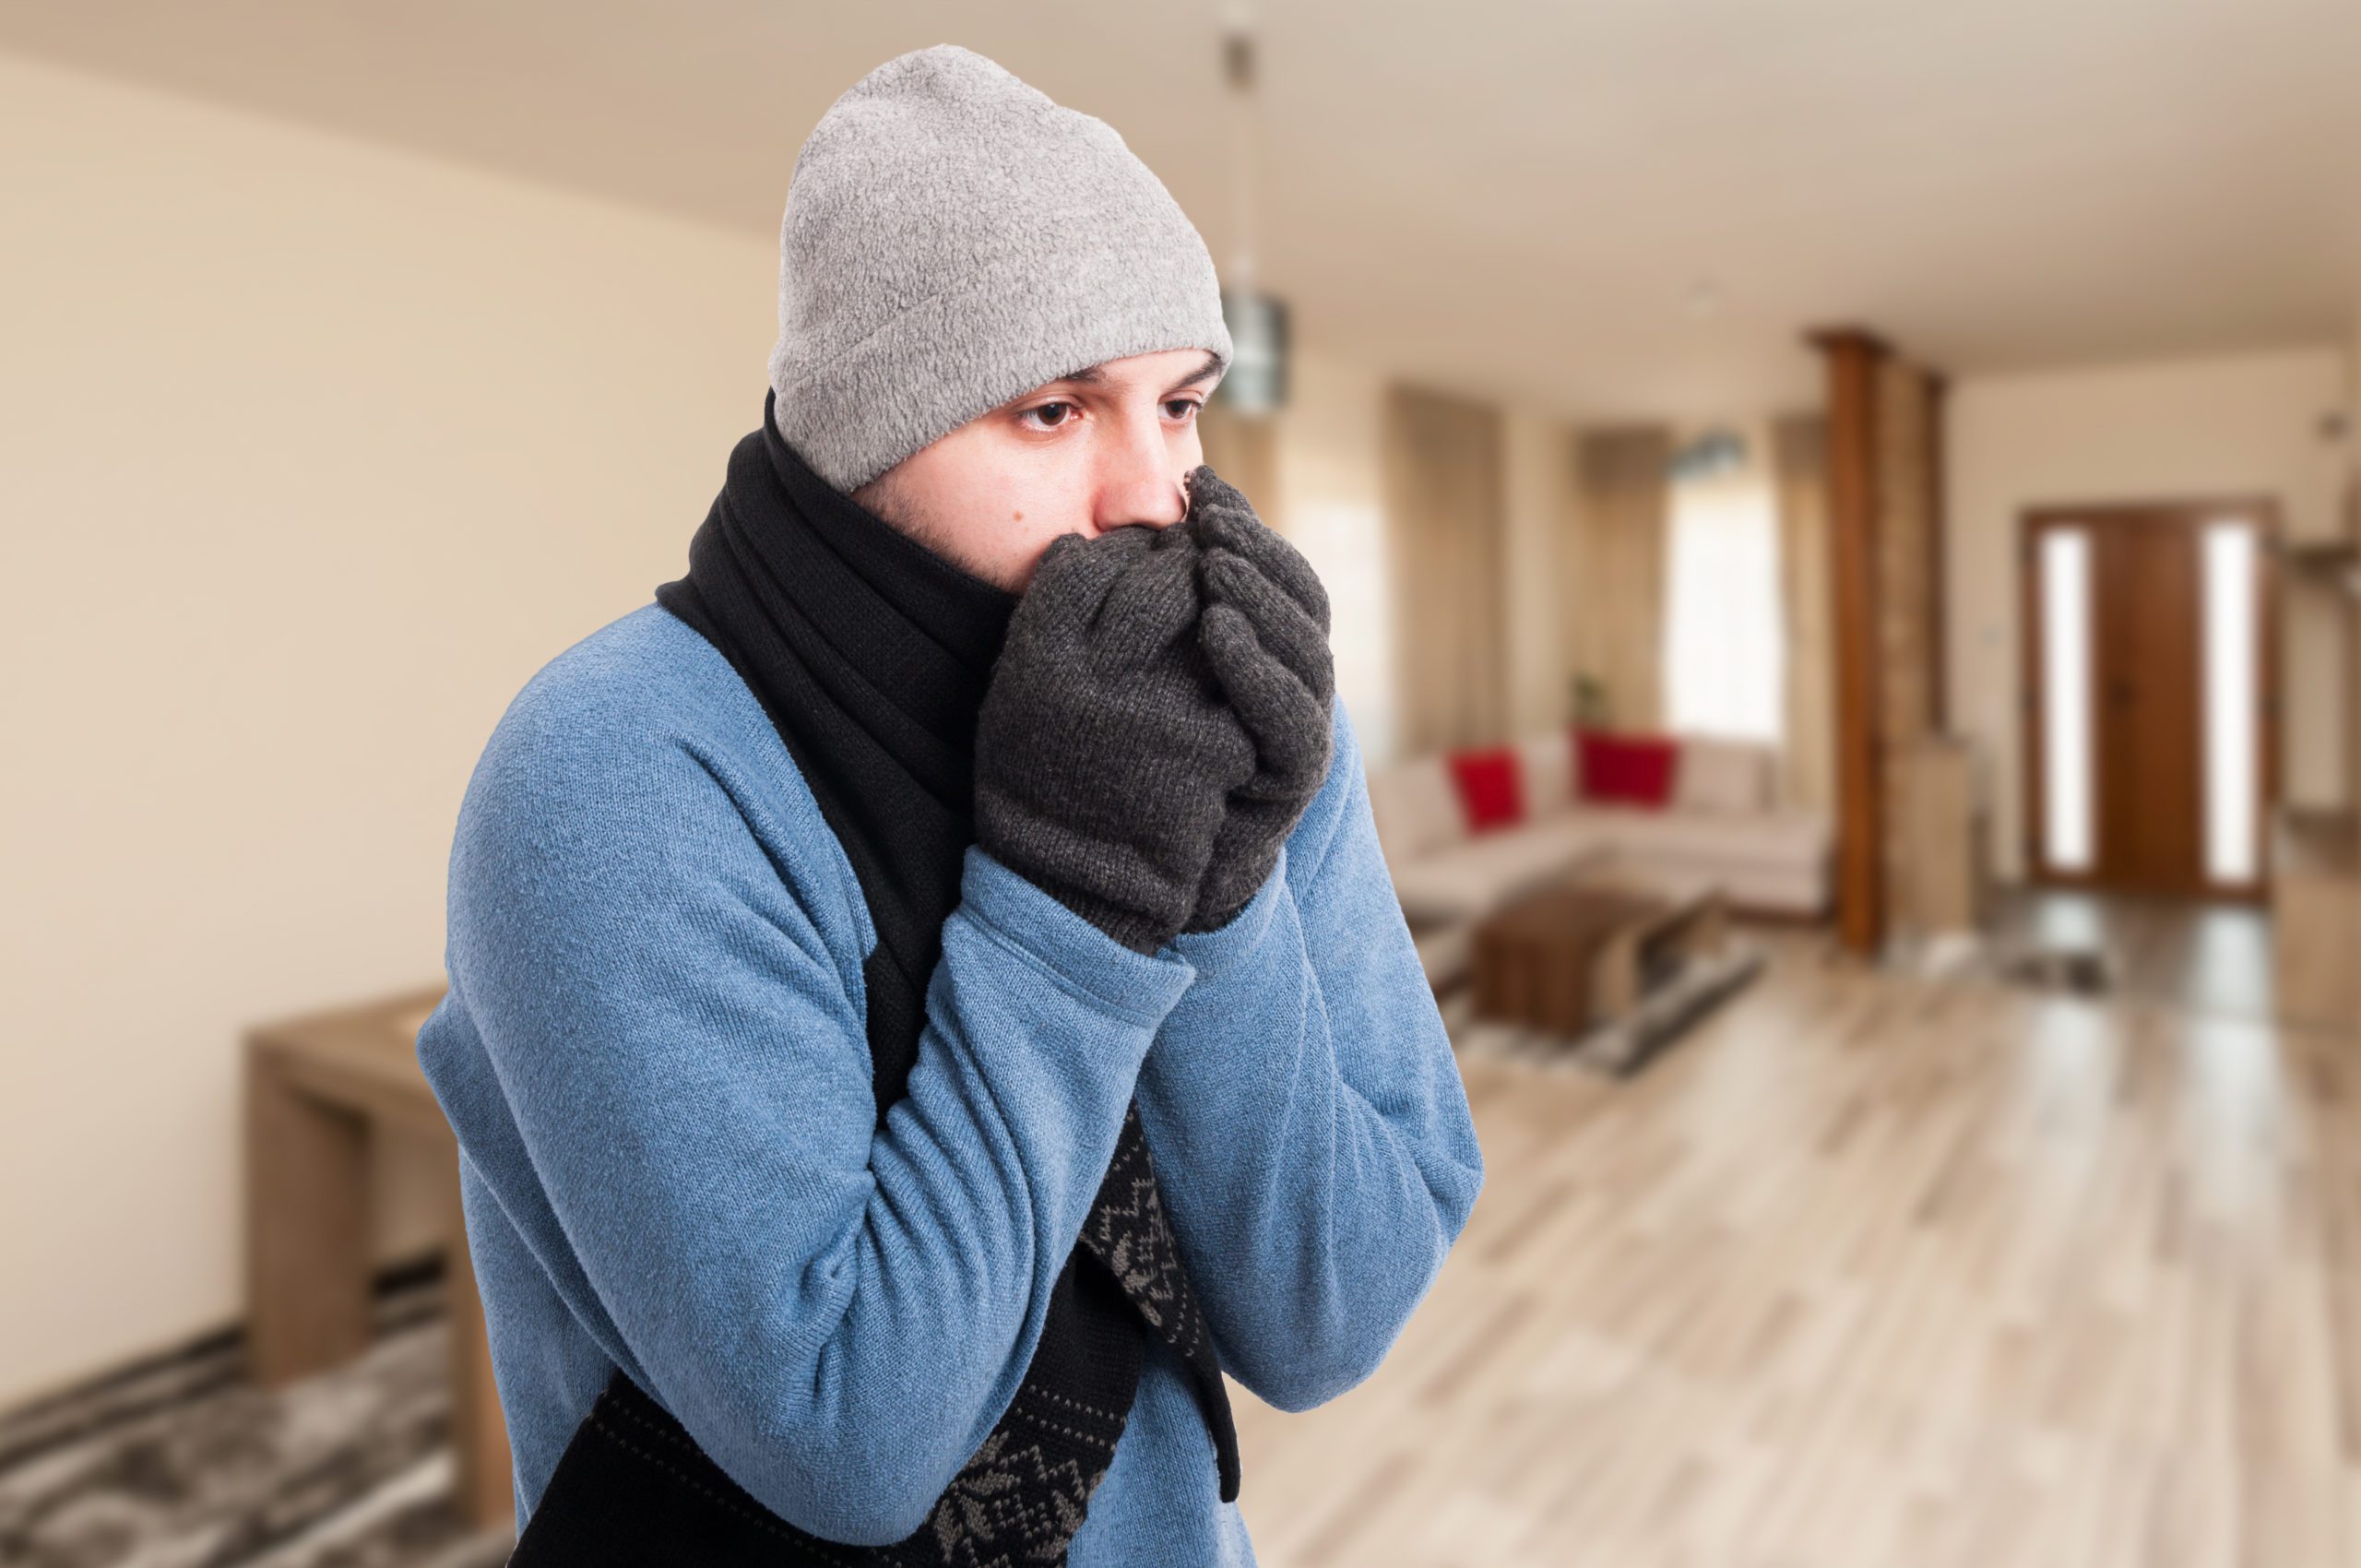 7 Ways to Keep Your House Warm Without Power